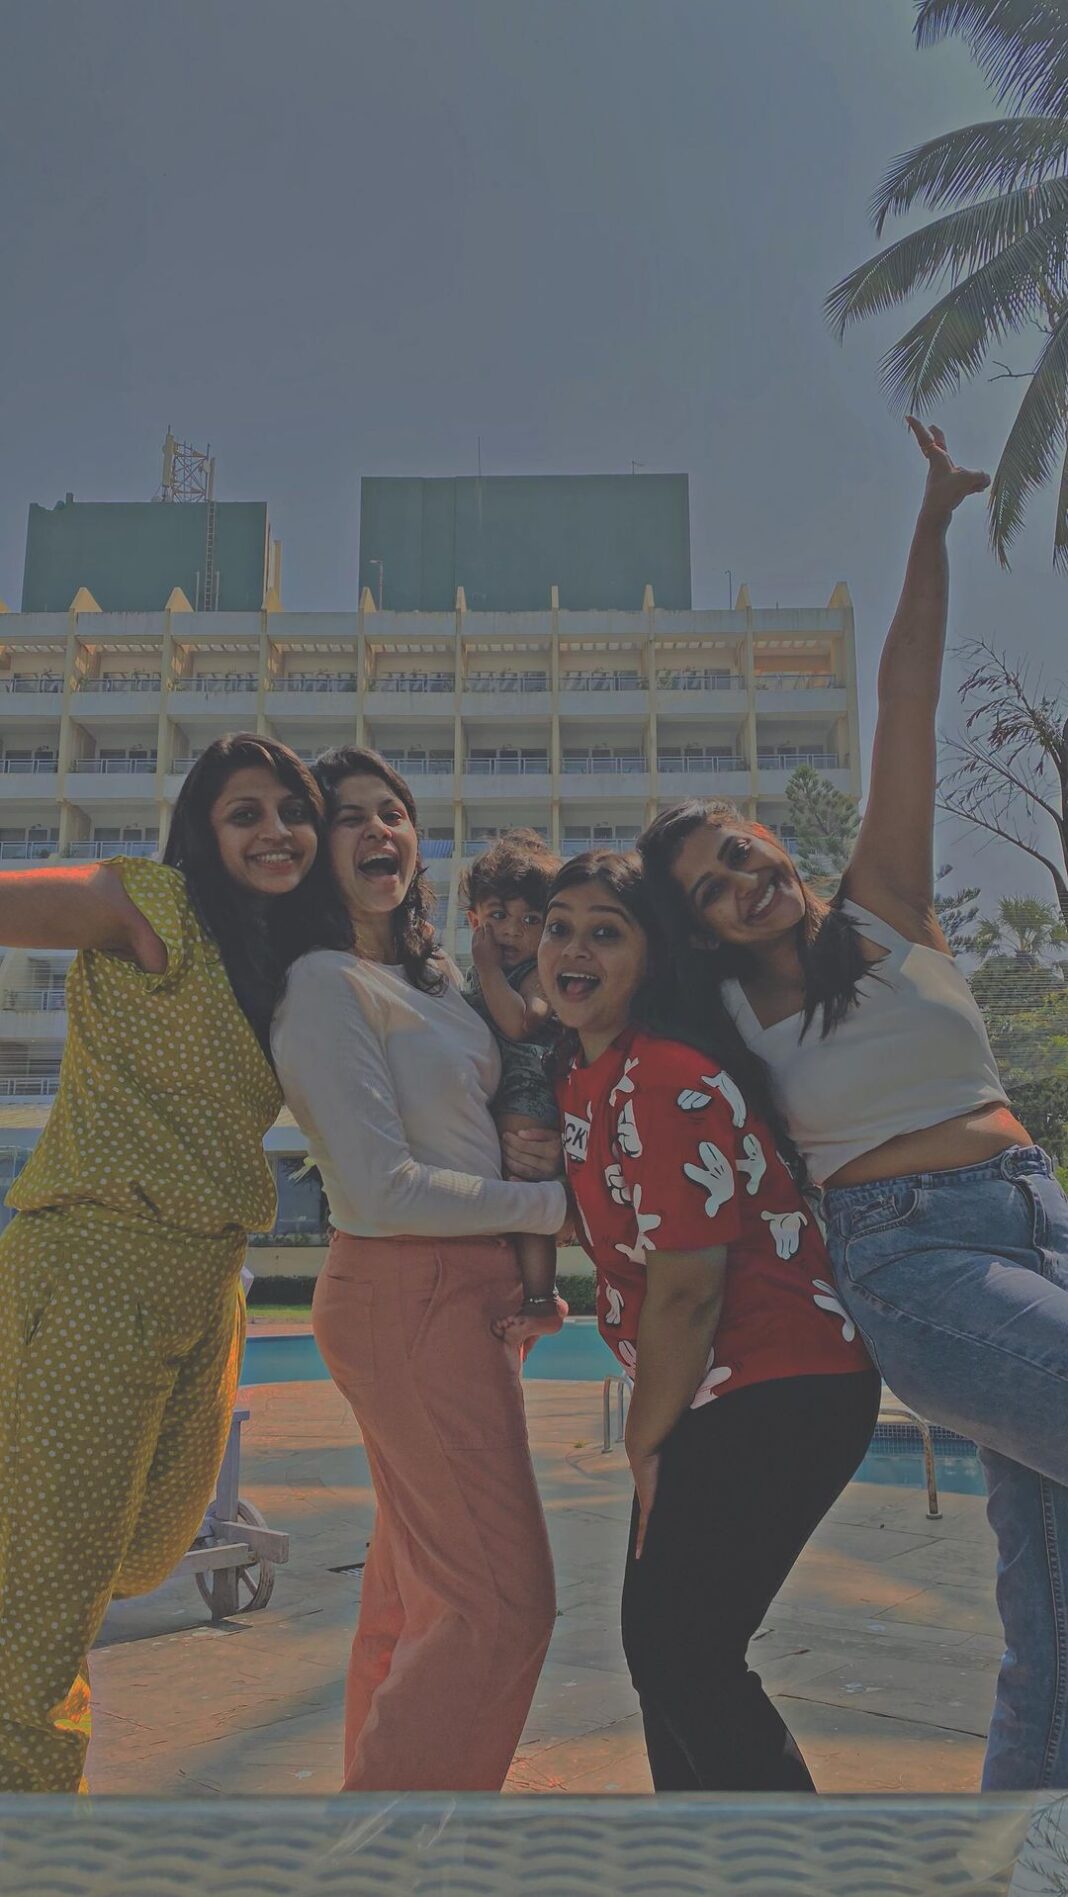 Pooja Jhaveri Instagram - Others only made it to the cover photo. And yet @krati_bhandari @duanajames did not even make it to the cover picture ! . . . But but but….. we did it 🥰 . . So proud of my girls; being mommas + working women + living poles apart and in the shittiest mumbai traffic, travelling all the way to make it happen for me….. I love you guys soooo muchhh…. Just made me feel the love they have for me….. Forever my GIRLS over everything else ❤️🥰✨ 15 years and counting ❤️ . . @bcreative.charmi @priya.p.parab @bhoomiie @krati_bhandari @duanajames . . #friendsforever #mygirls #girlsnightout #girlstrip #thingsyoudoonholiday #reels #reelsinstagram #reelit #reelitfeelit #trendingreels #trendingsongs #trend